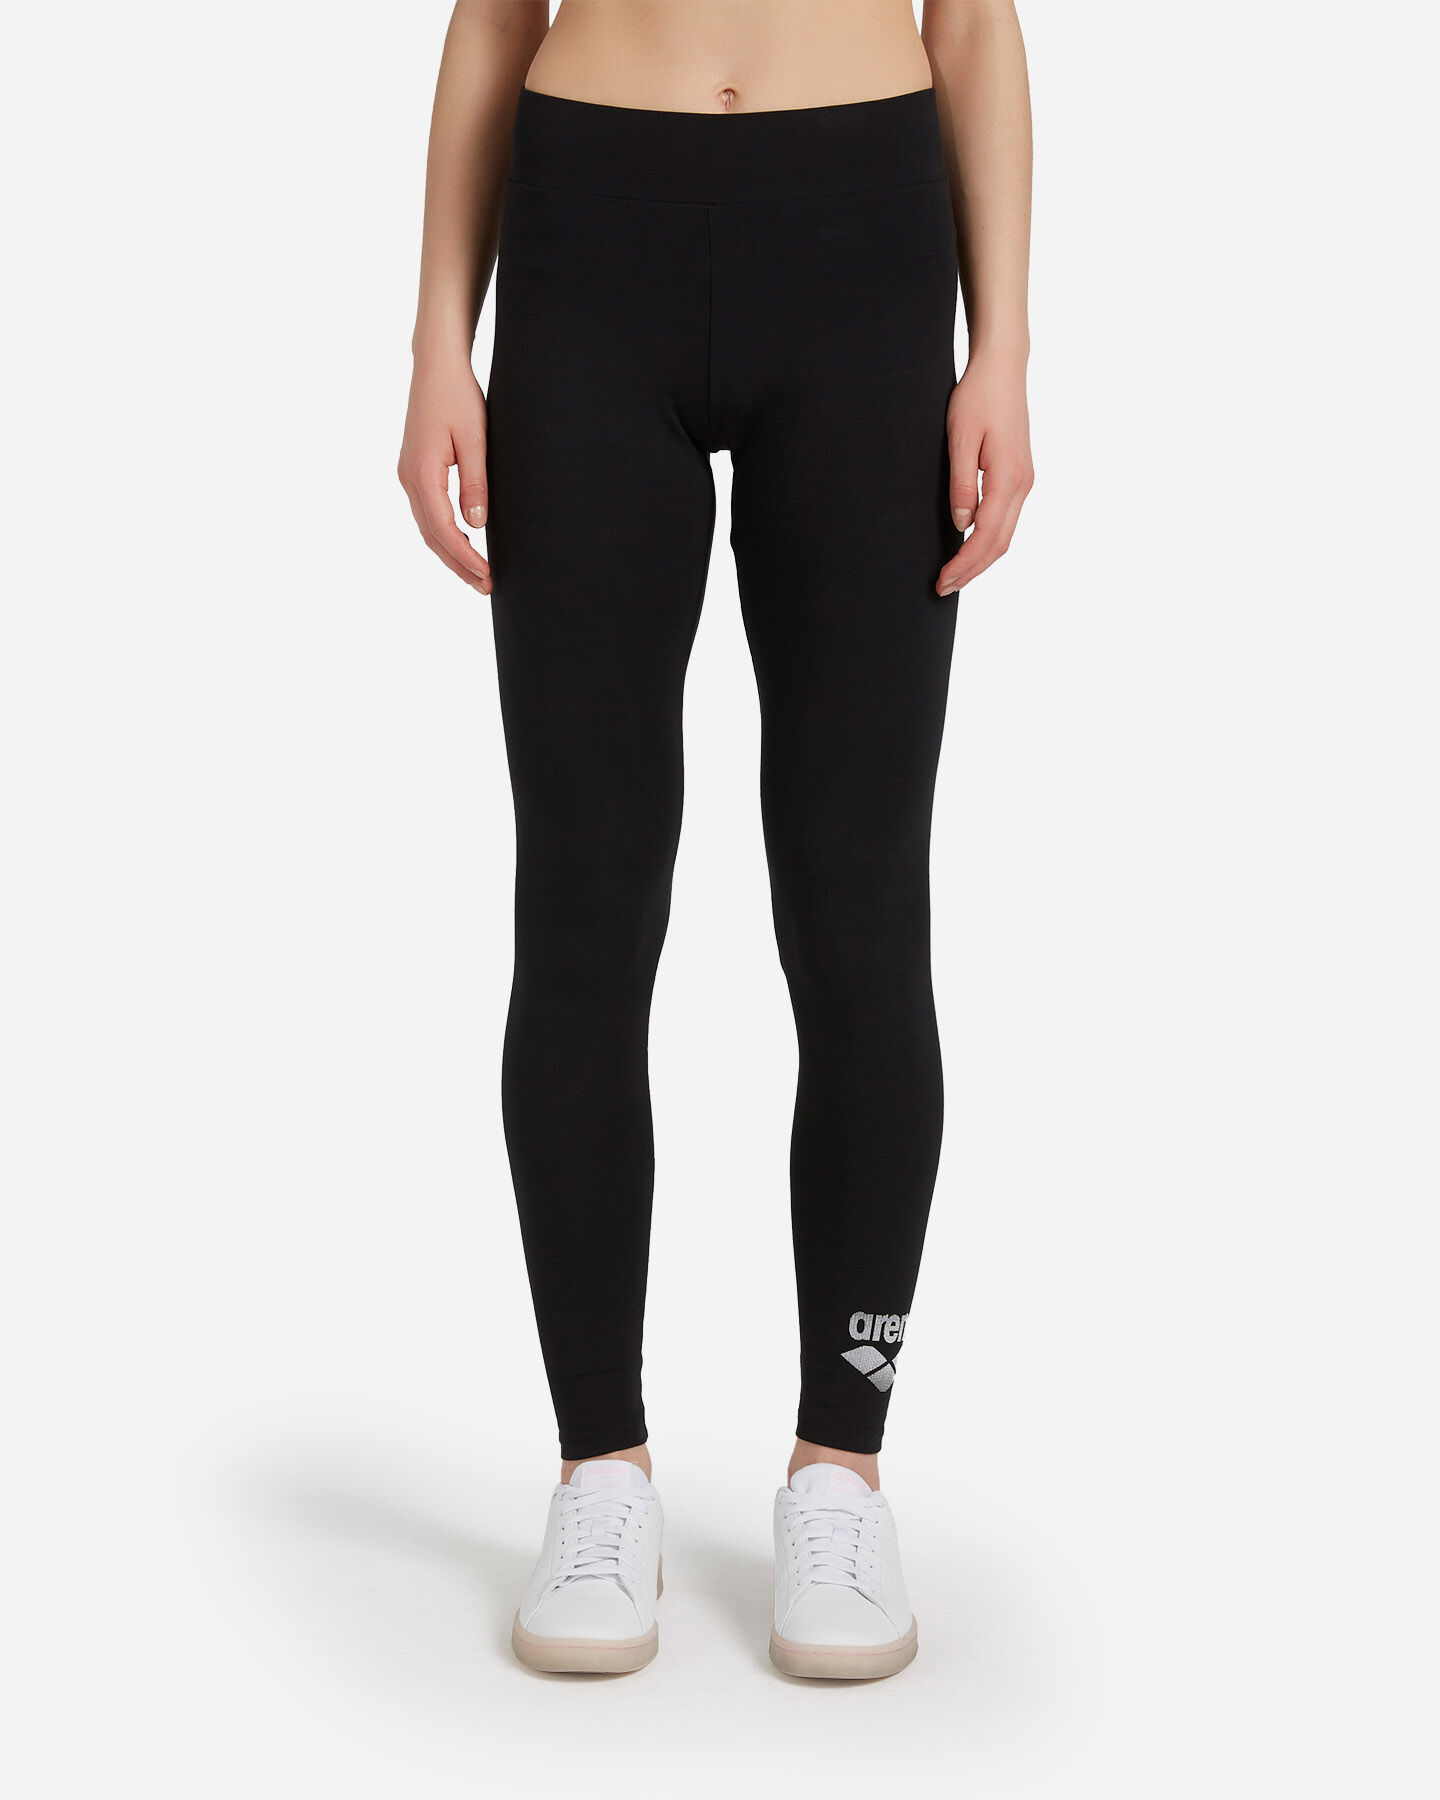  Leggings ARENA JSTRETCH PERFORM W S4087556|050|XS scatto 0